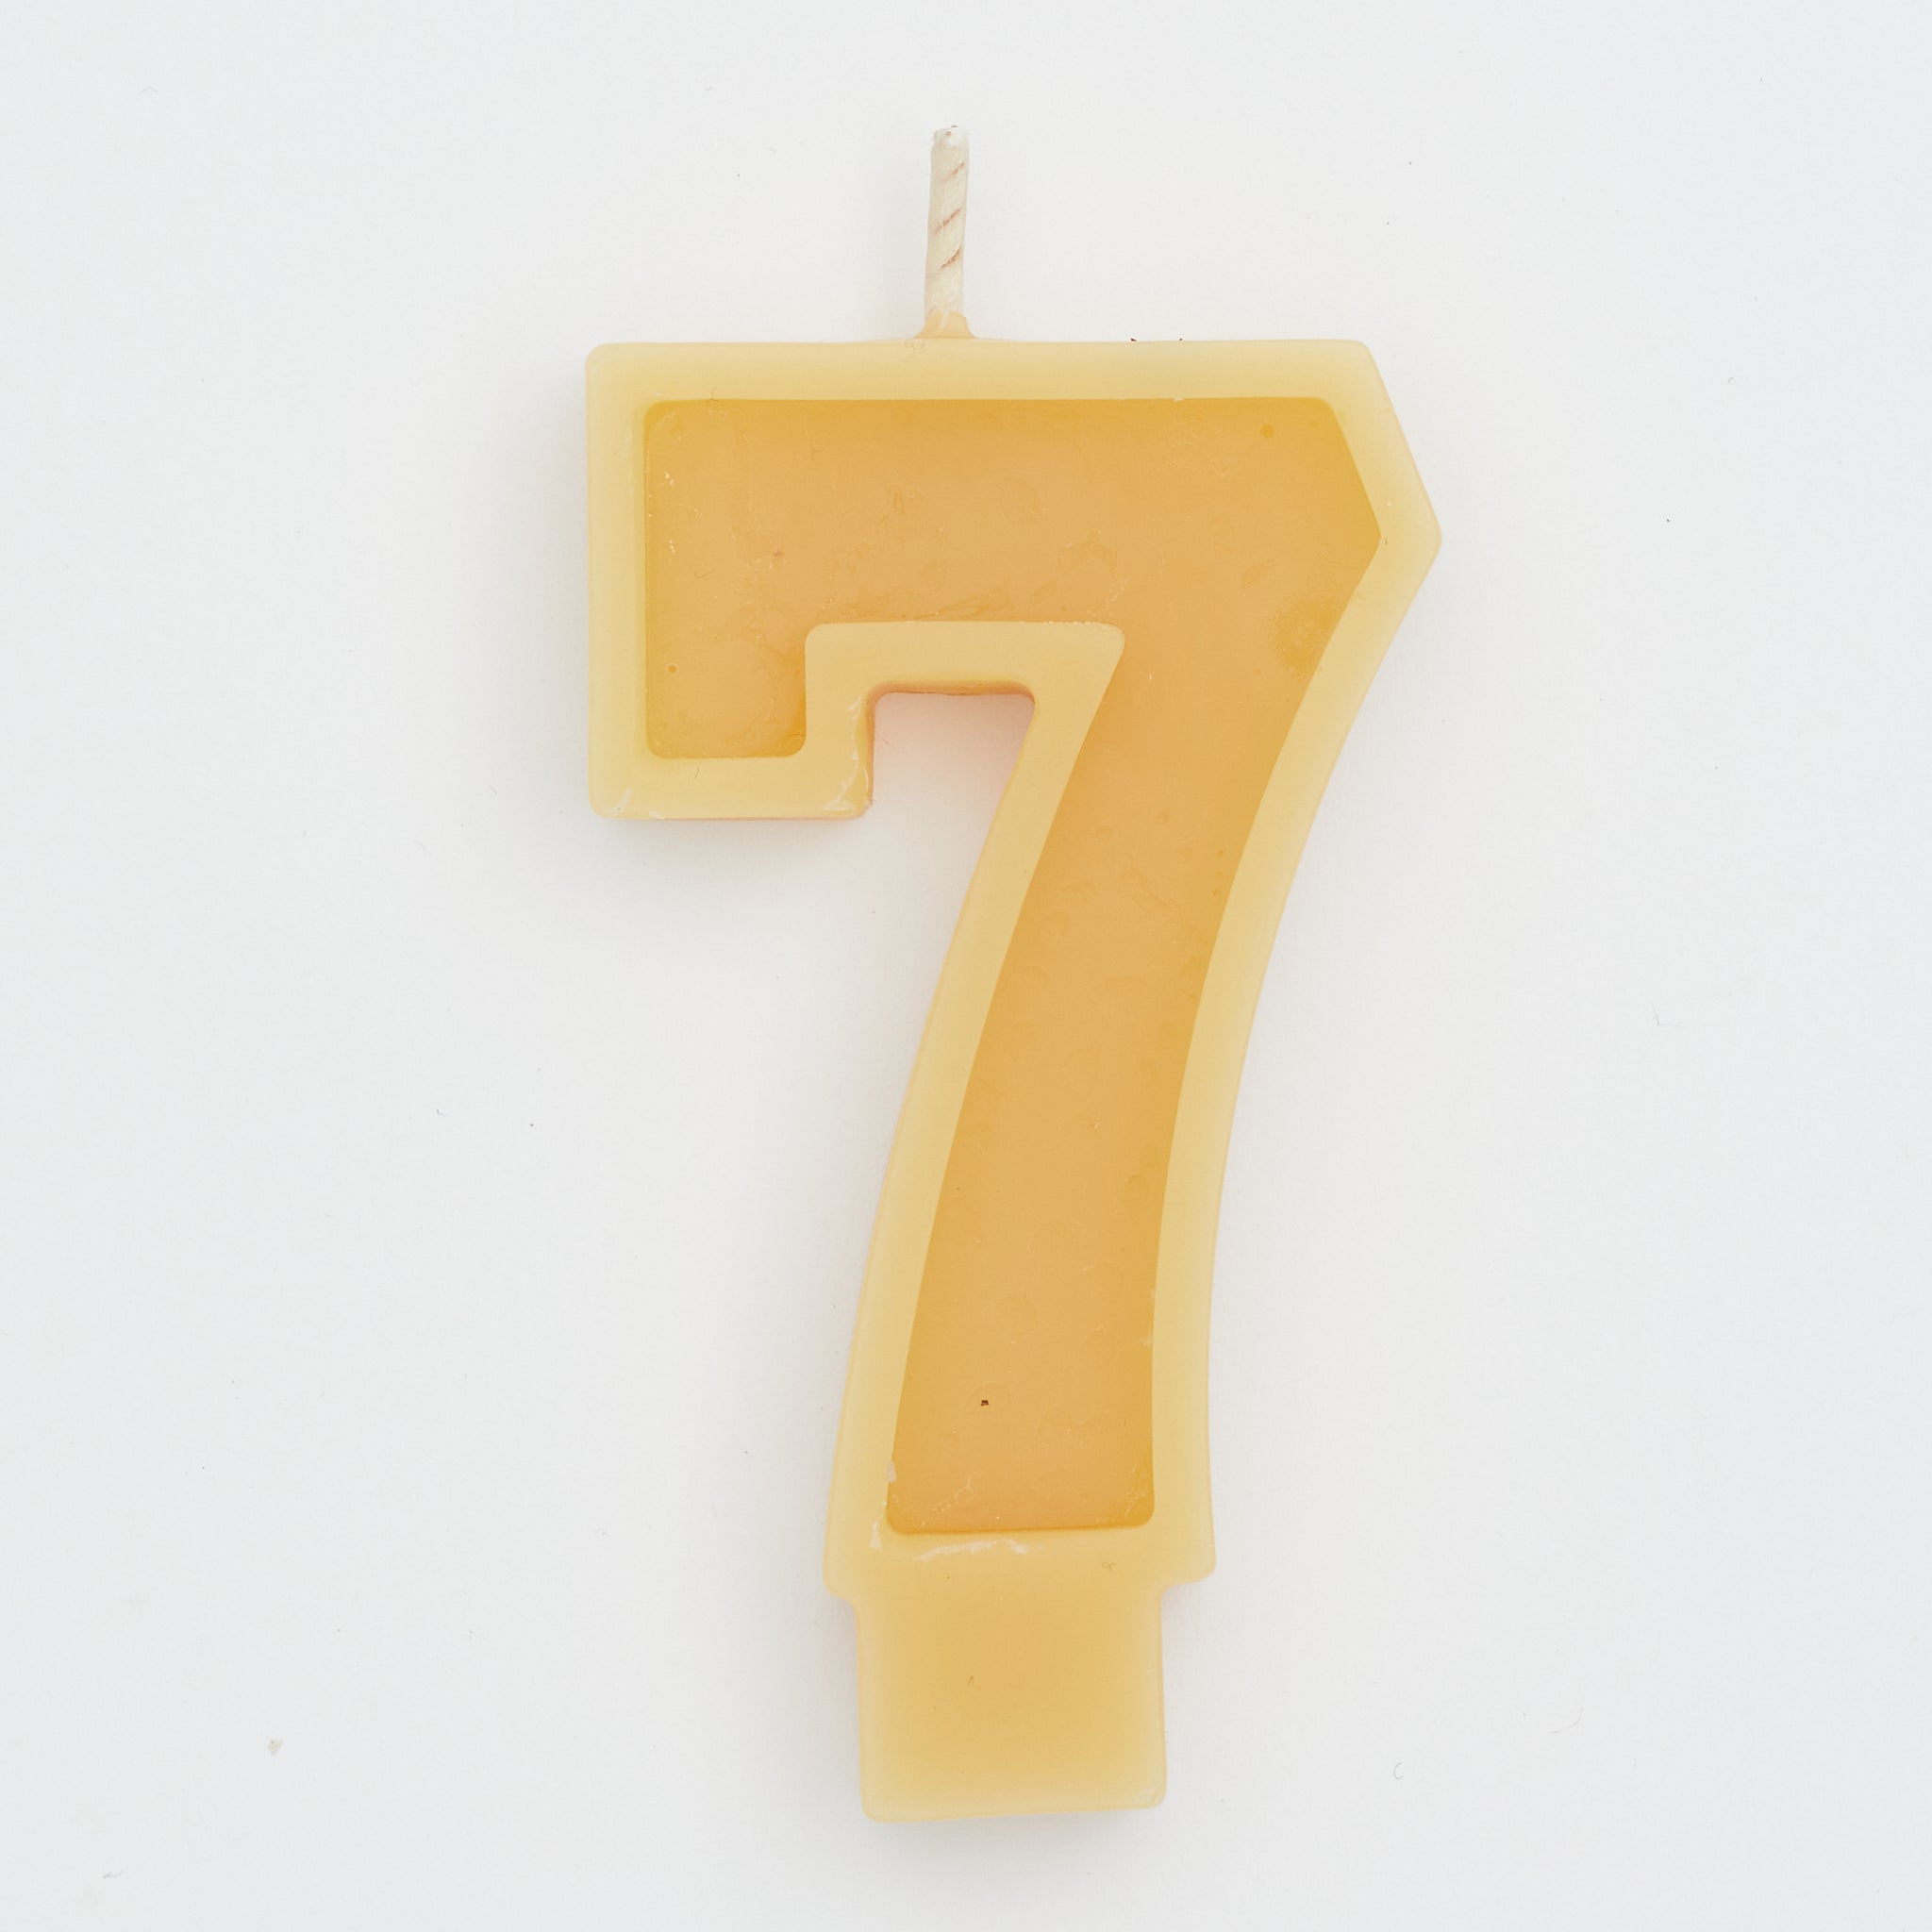 Blake & Mason Beeswax Celebration Number 7 Candles | made in Australia